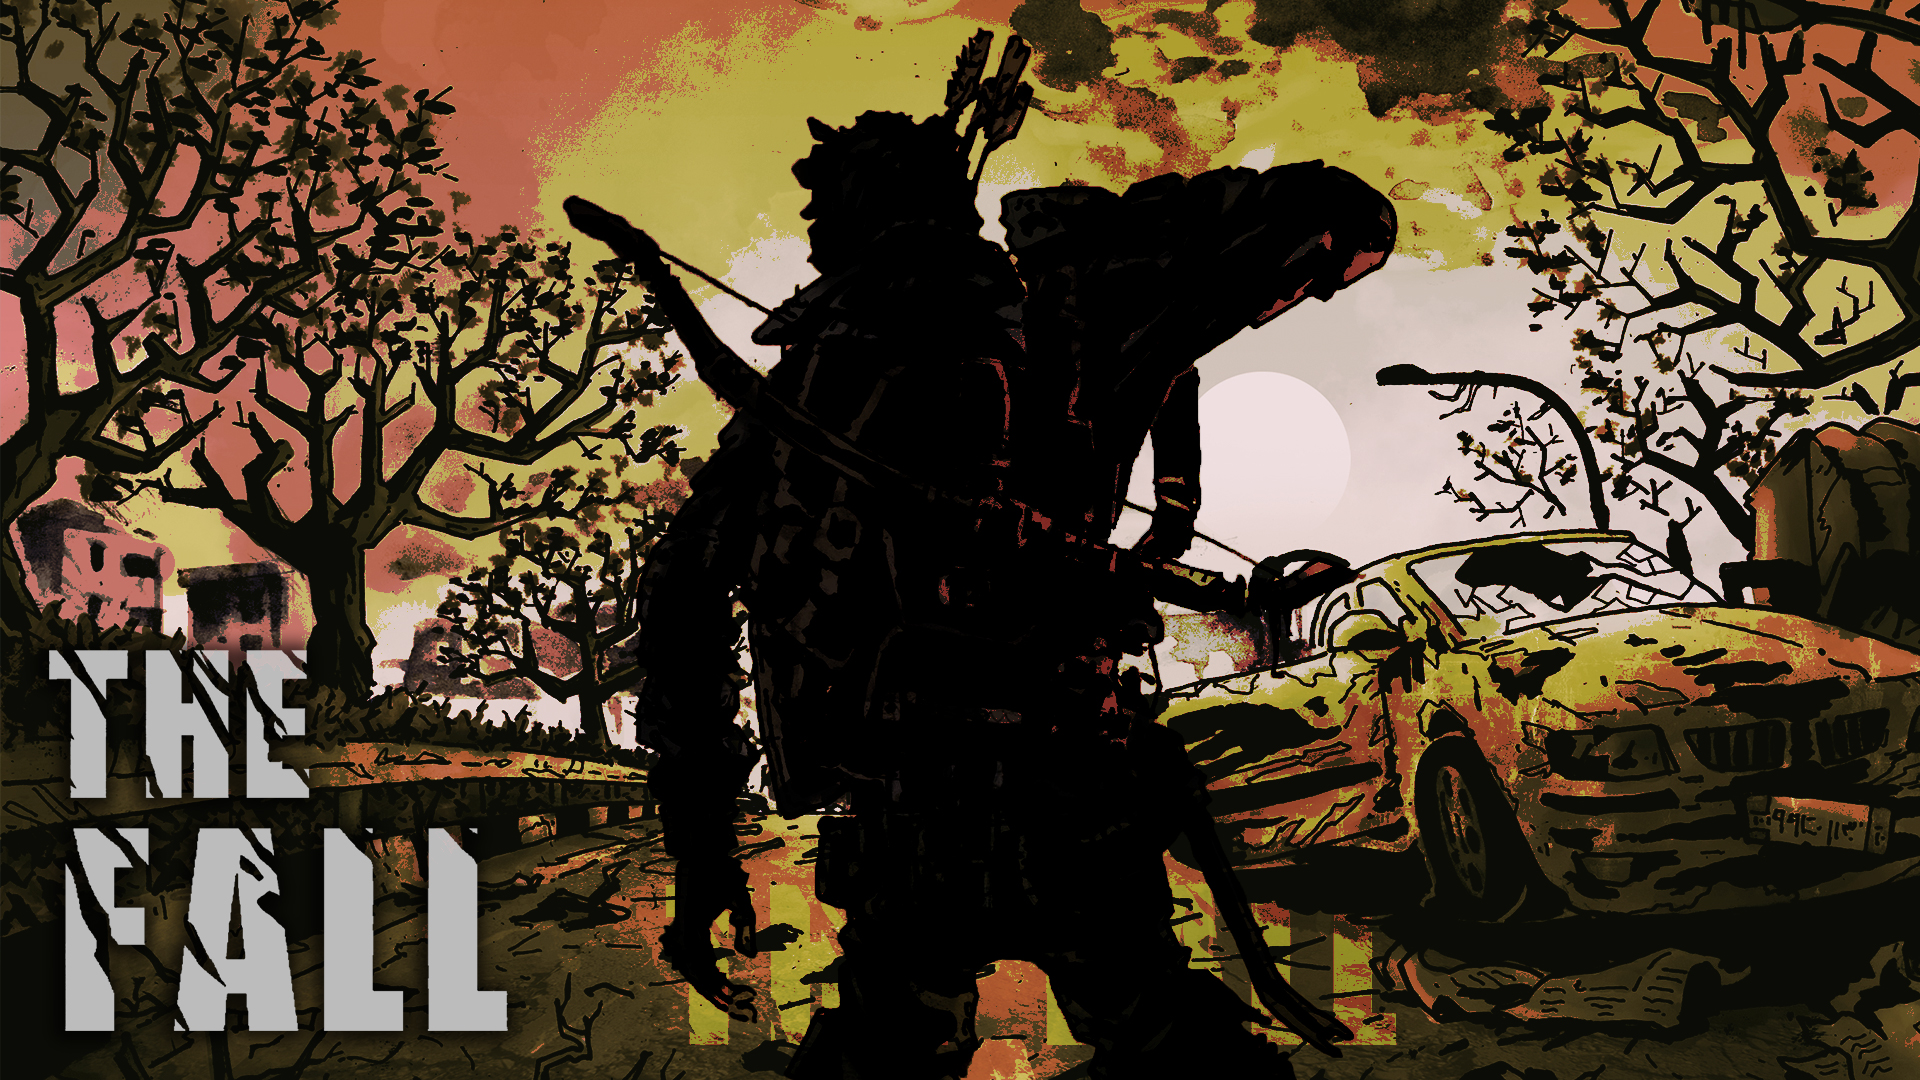 Download The Fall : Zombie Survival für Android kostenlos.